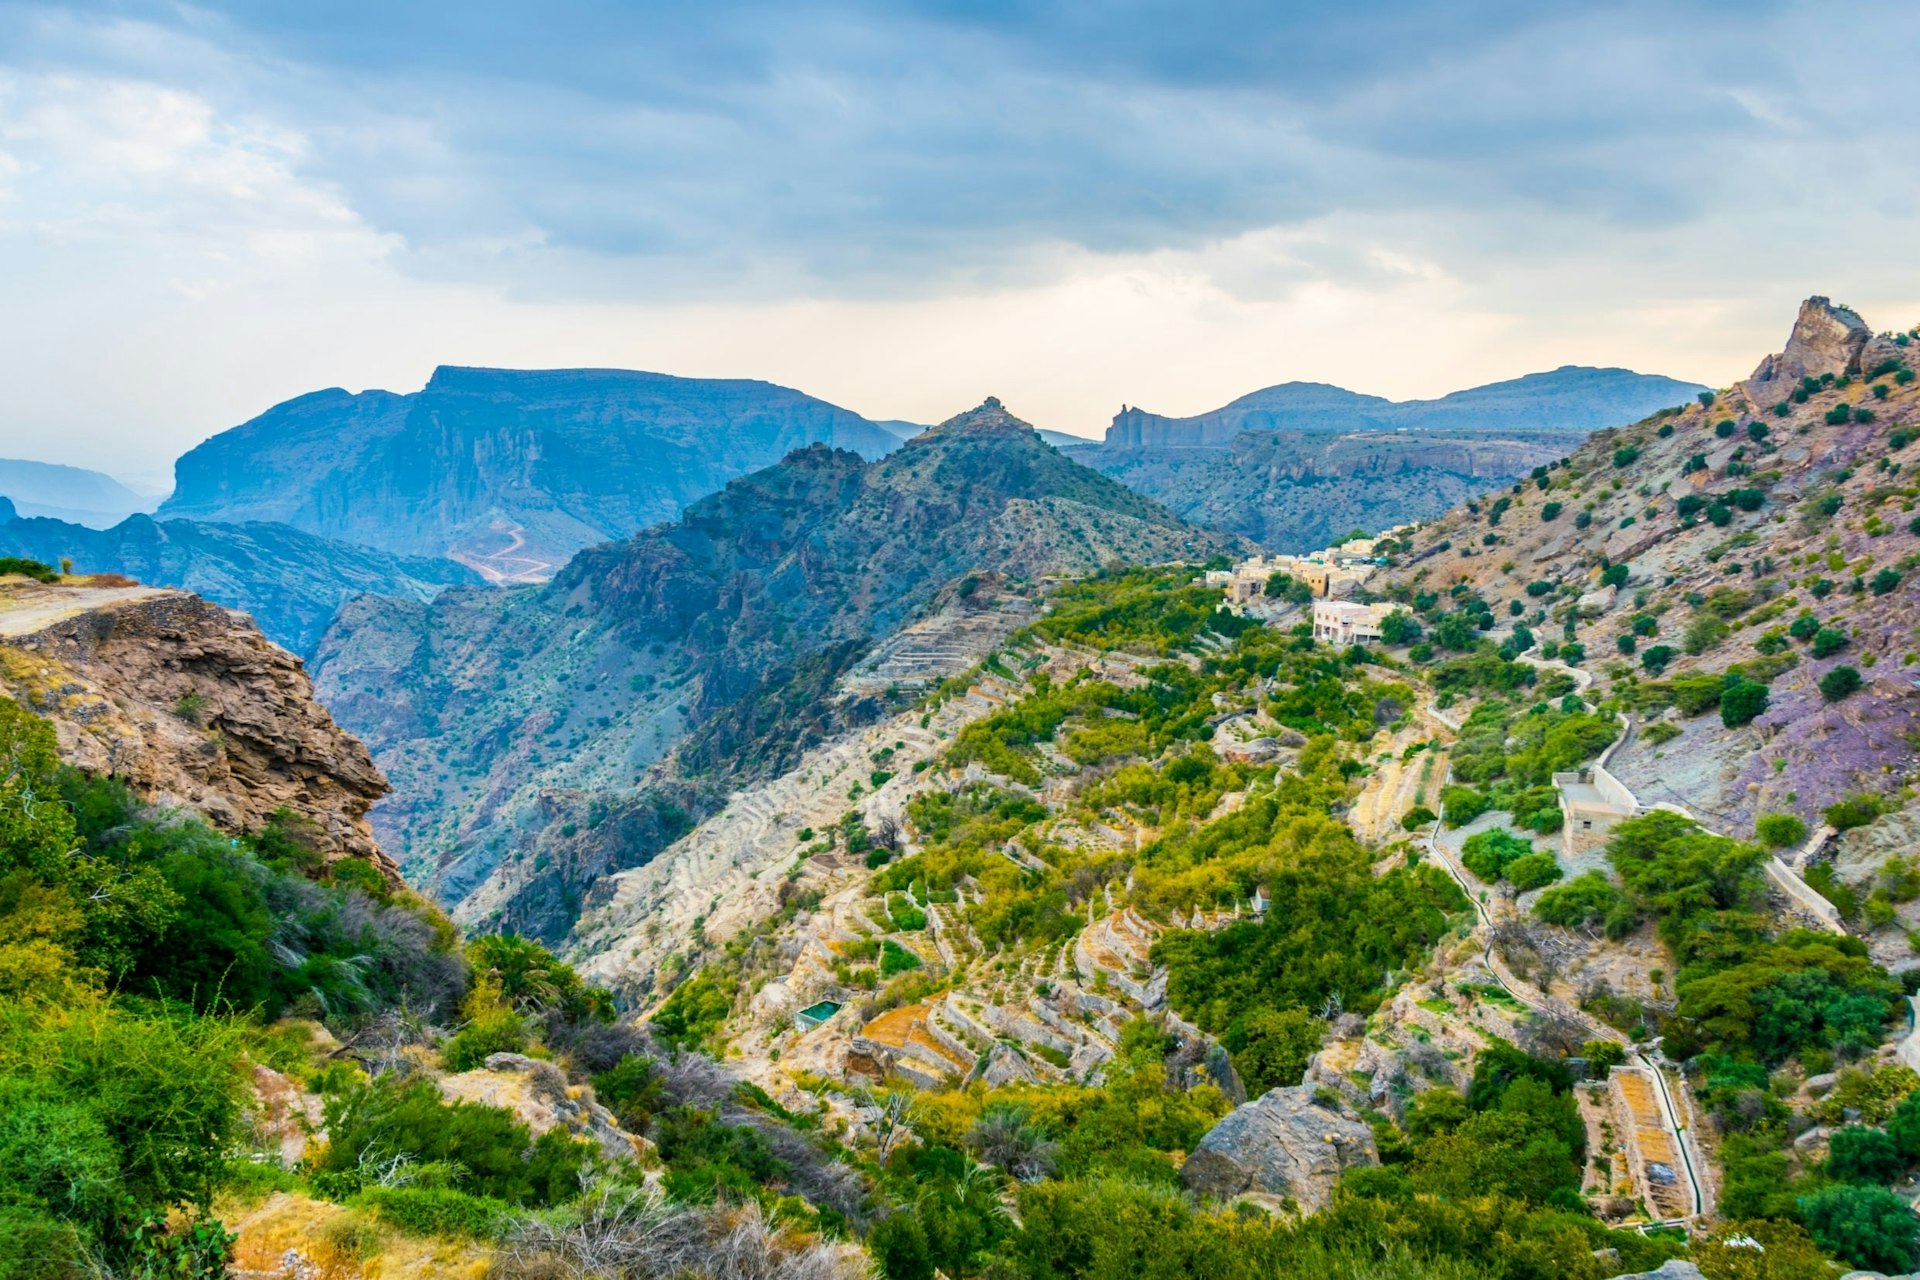 View of the small rural villages in the Jebel Akhdar mountains